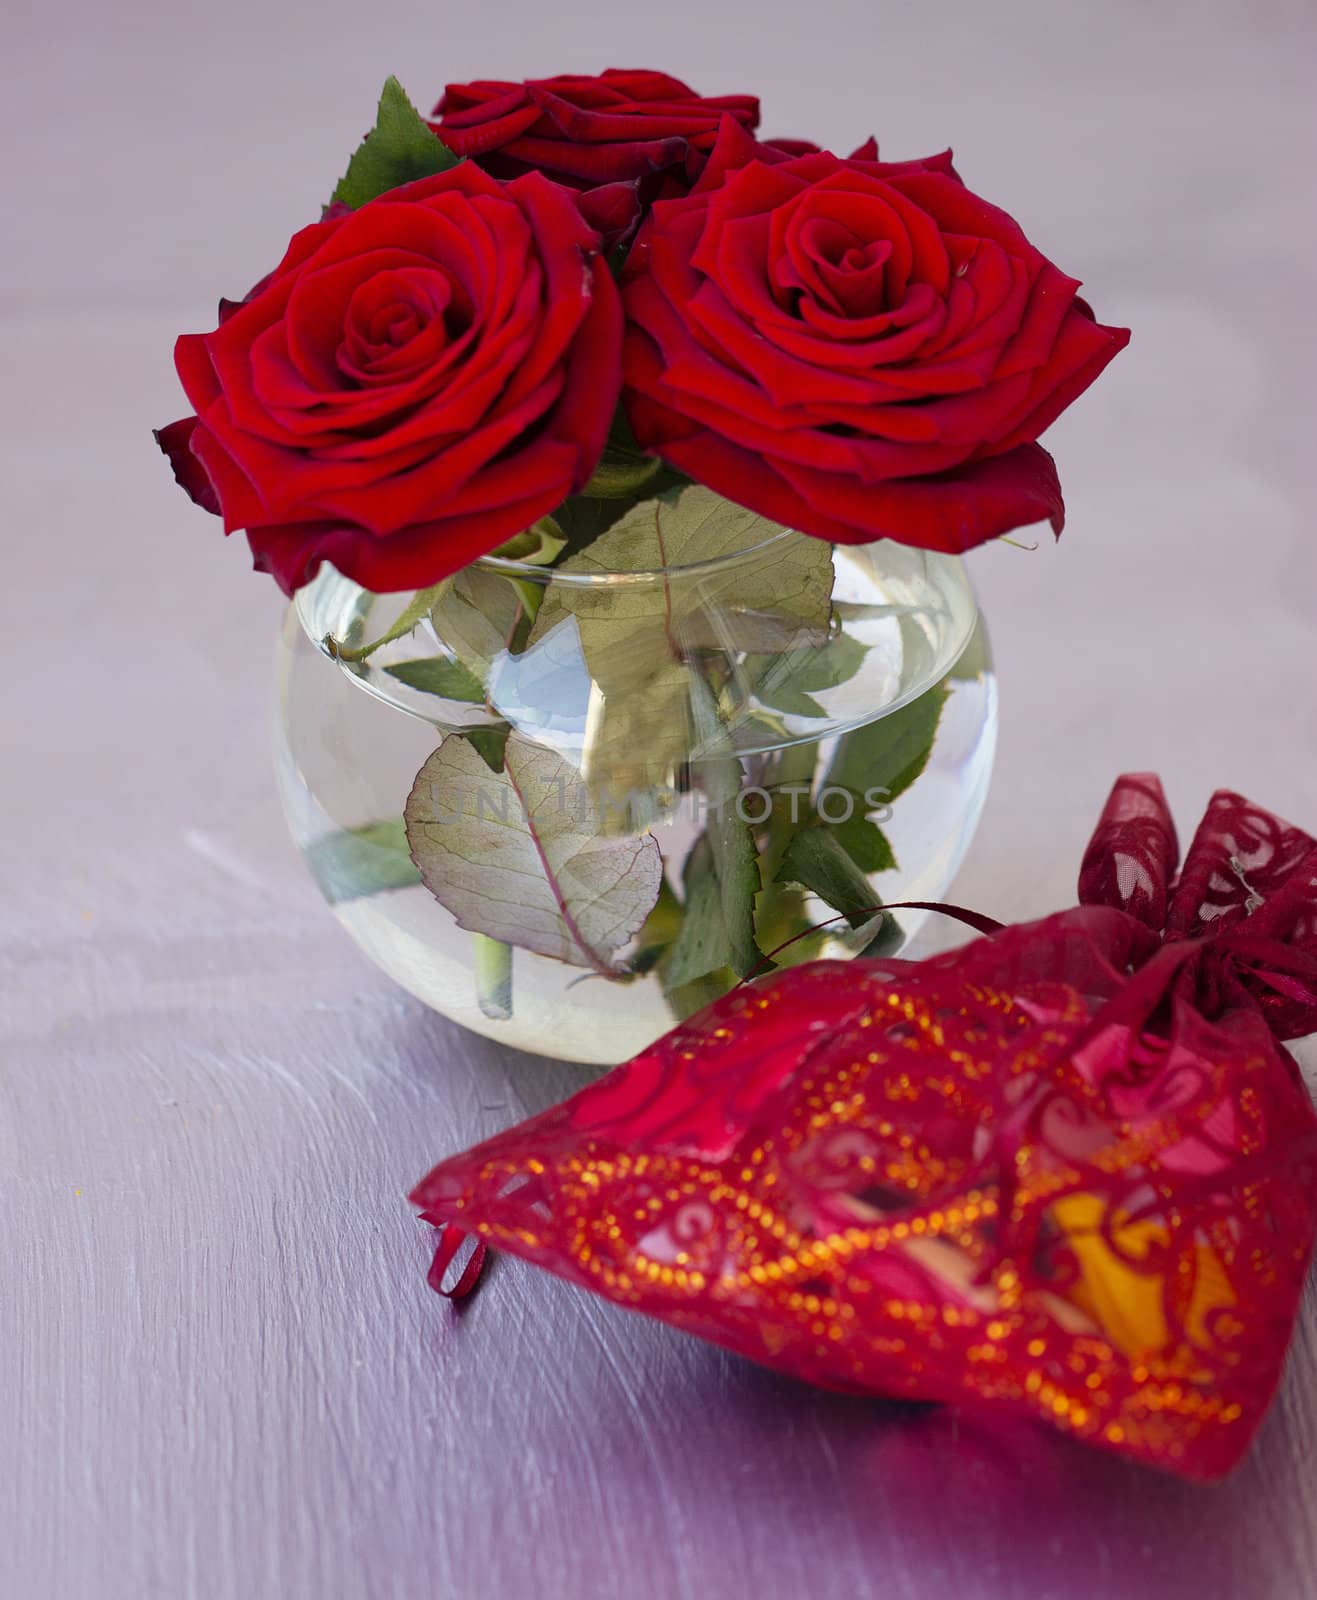 Round transparent vase with red roses on the table close-up